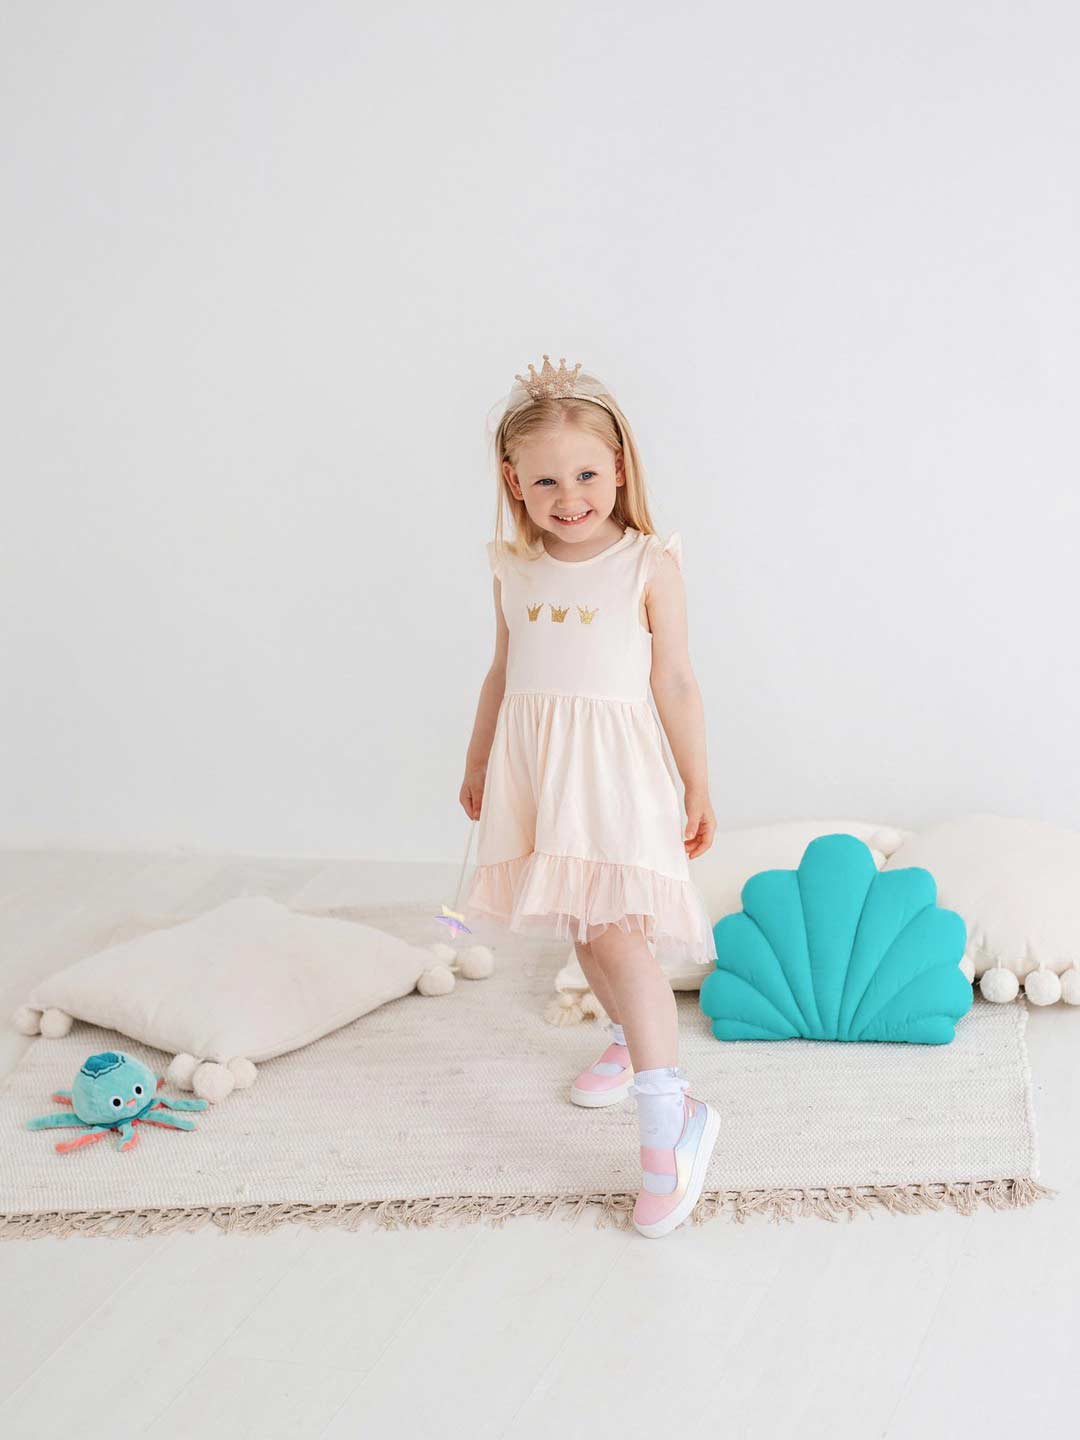 The Baby Dress Gold Fish 313 is a soft and comfy dress for fashionable little ladies. Made from high quality stockinet and blended with cotton and elastane, this dress has an easy clippable button closure on the shoulder for added ease in dressing. 